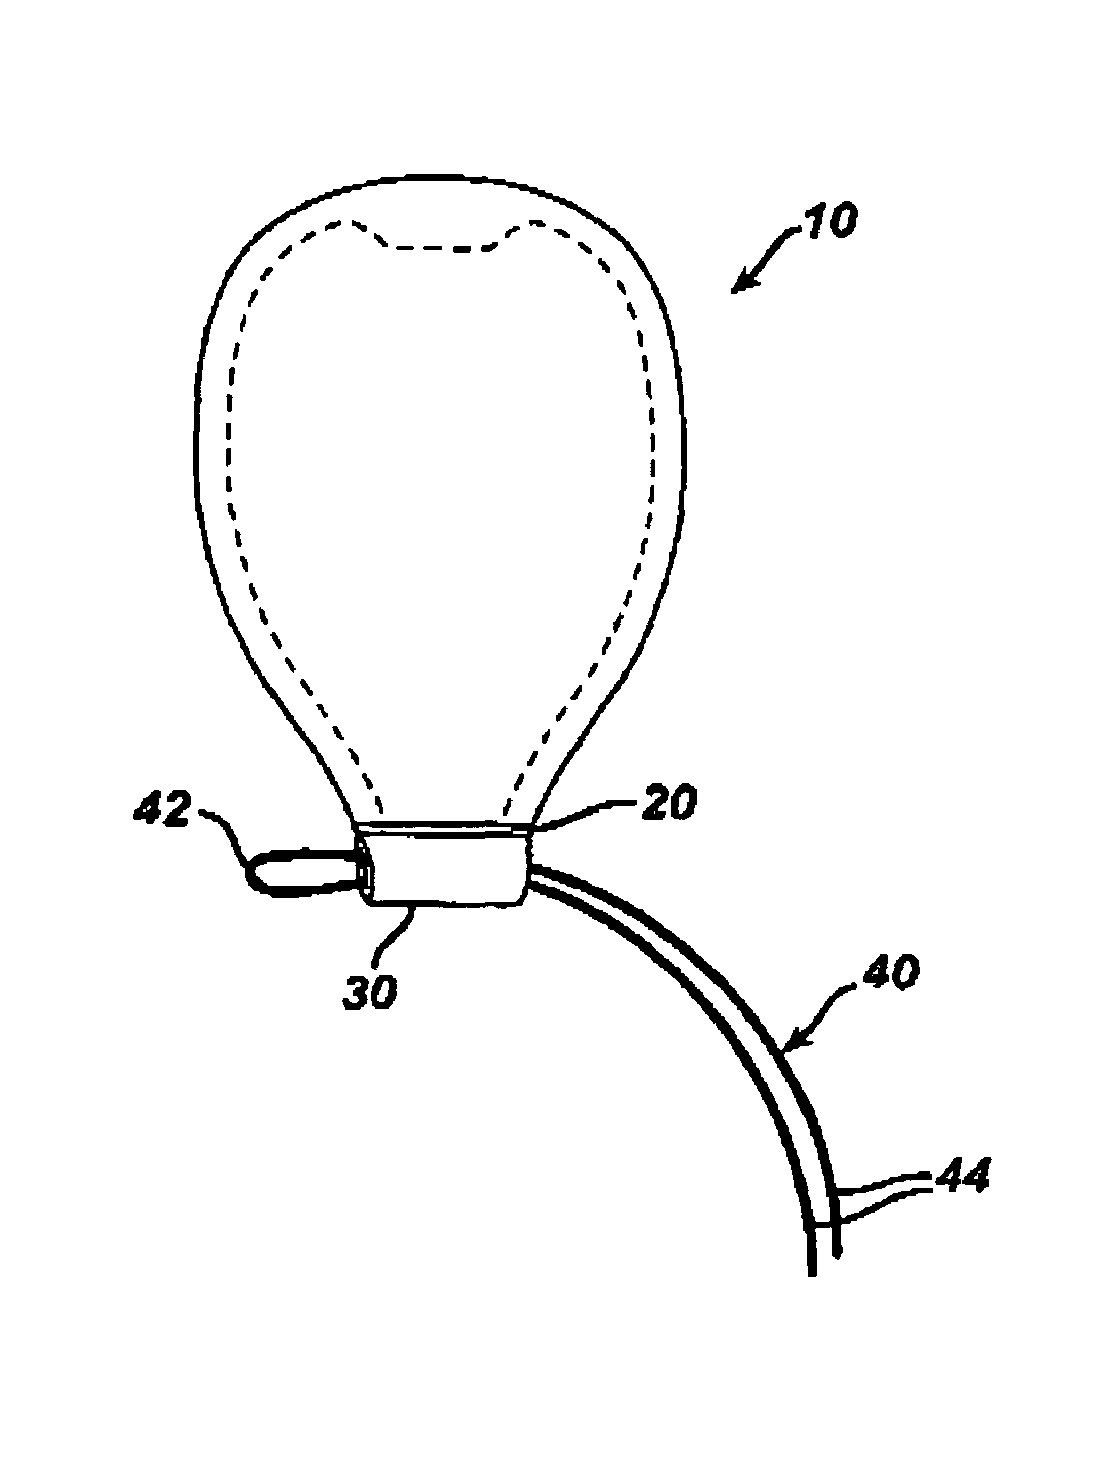 Removal string attachment for intravaginal devices